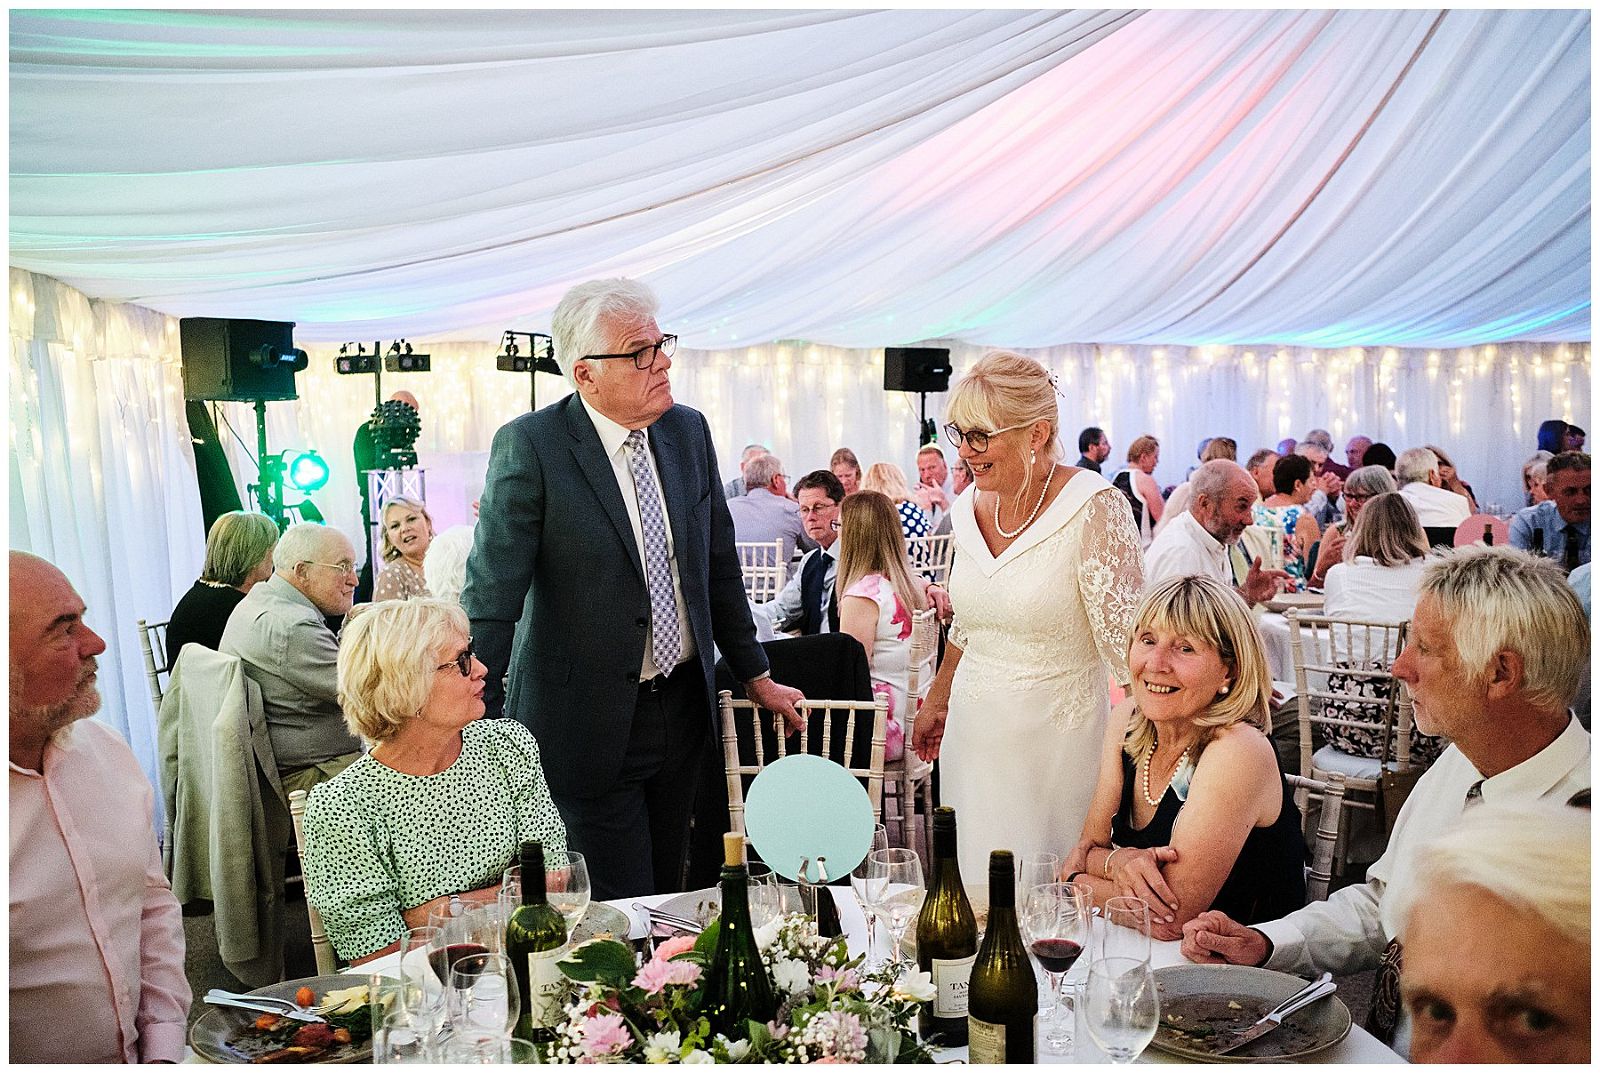 Natural photographs of the guests enjoying the wedding breakfast and evenings celebrations at Goldstone Hall in Shropshire by Documentary Wedding Photographer Stuart James